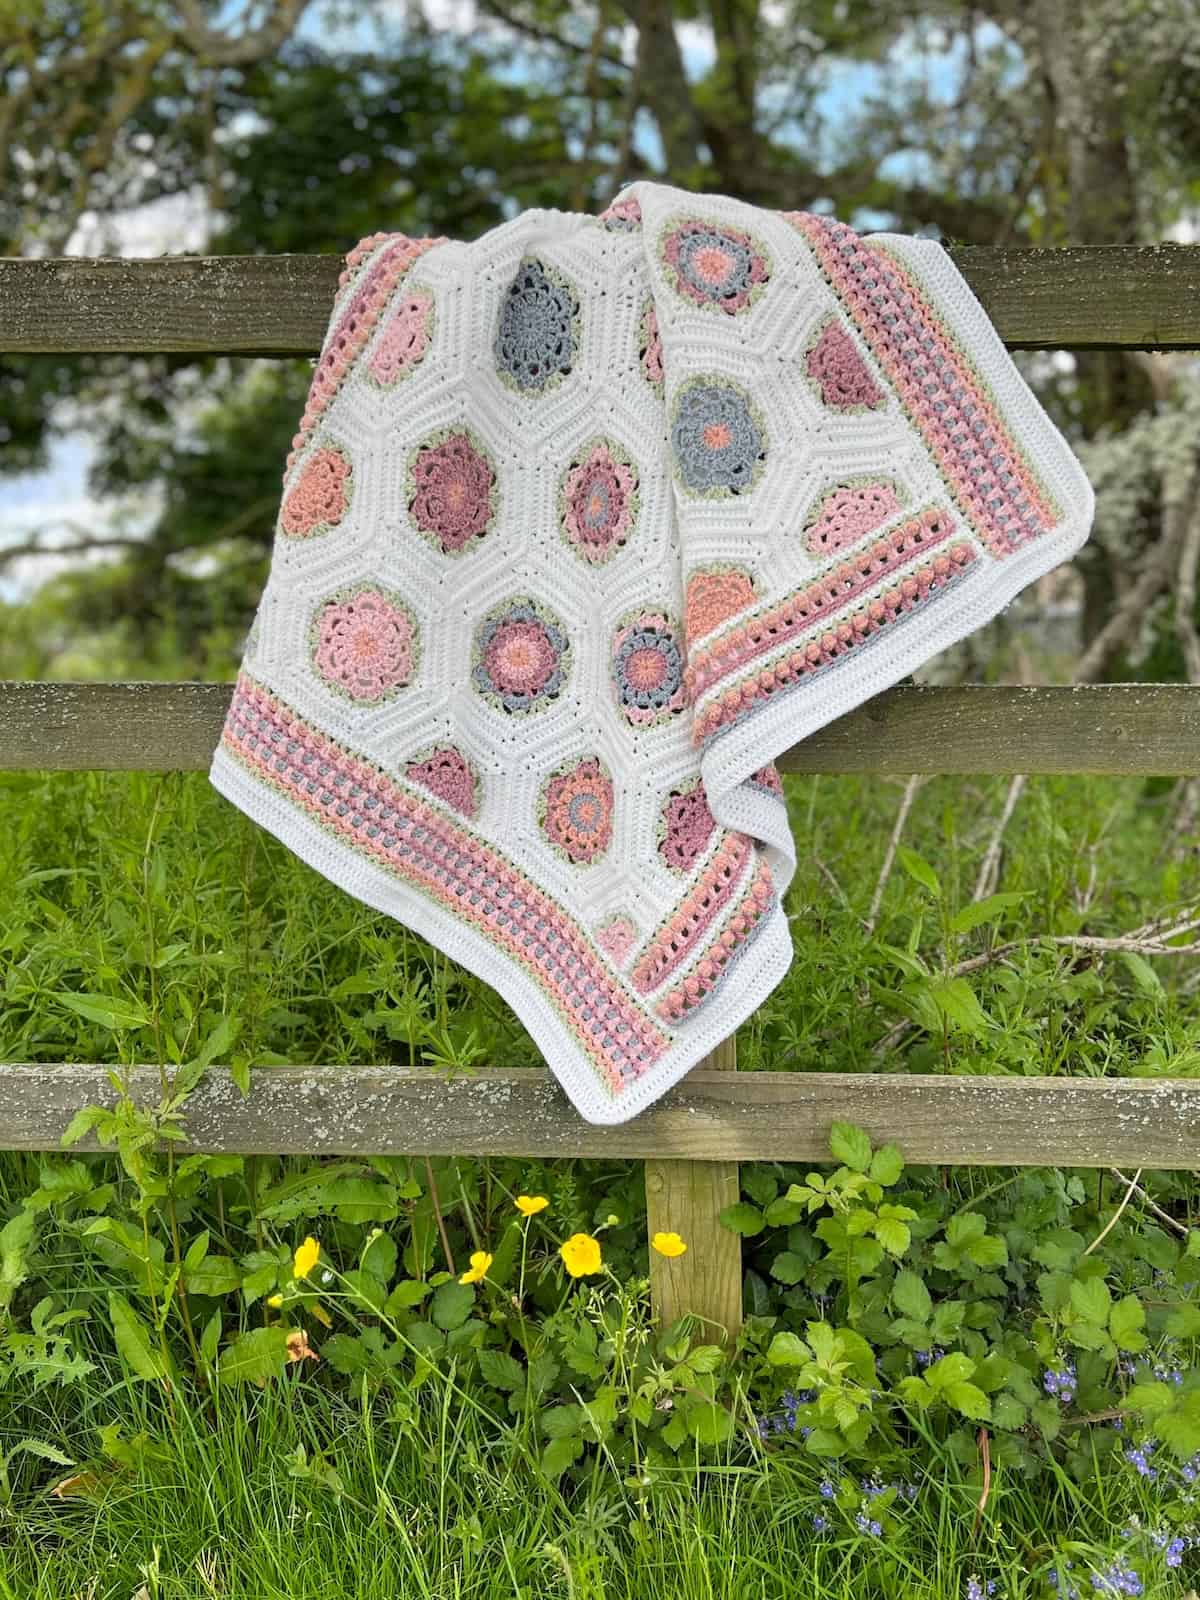 Crochet blanket made with hexagon motifs and flower stitches hanging on a gate.